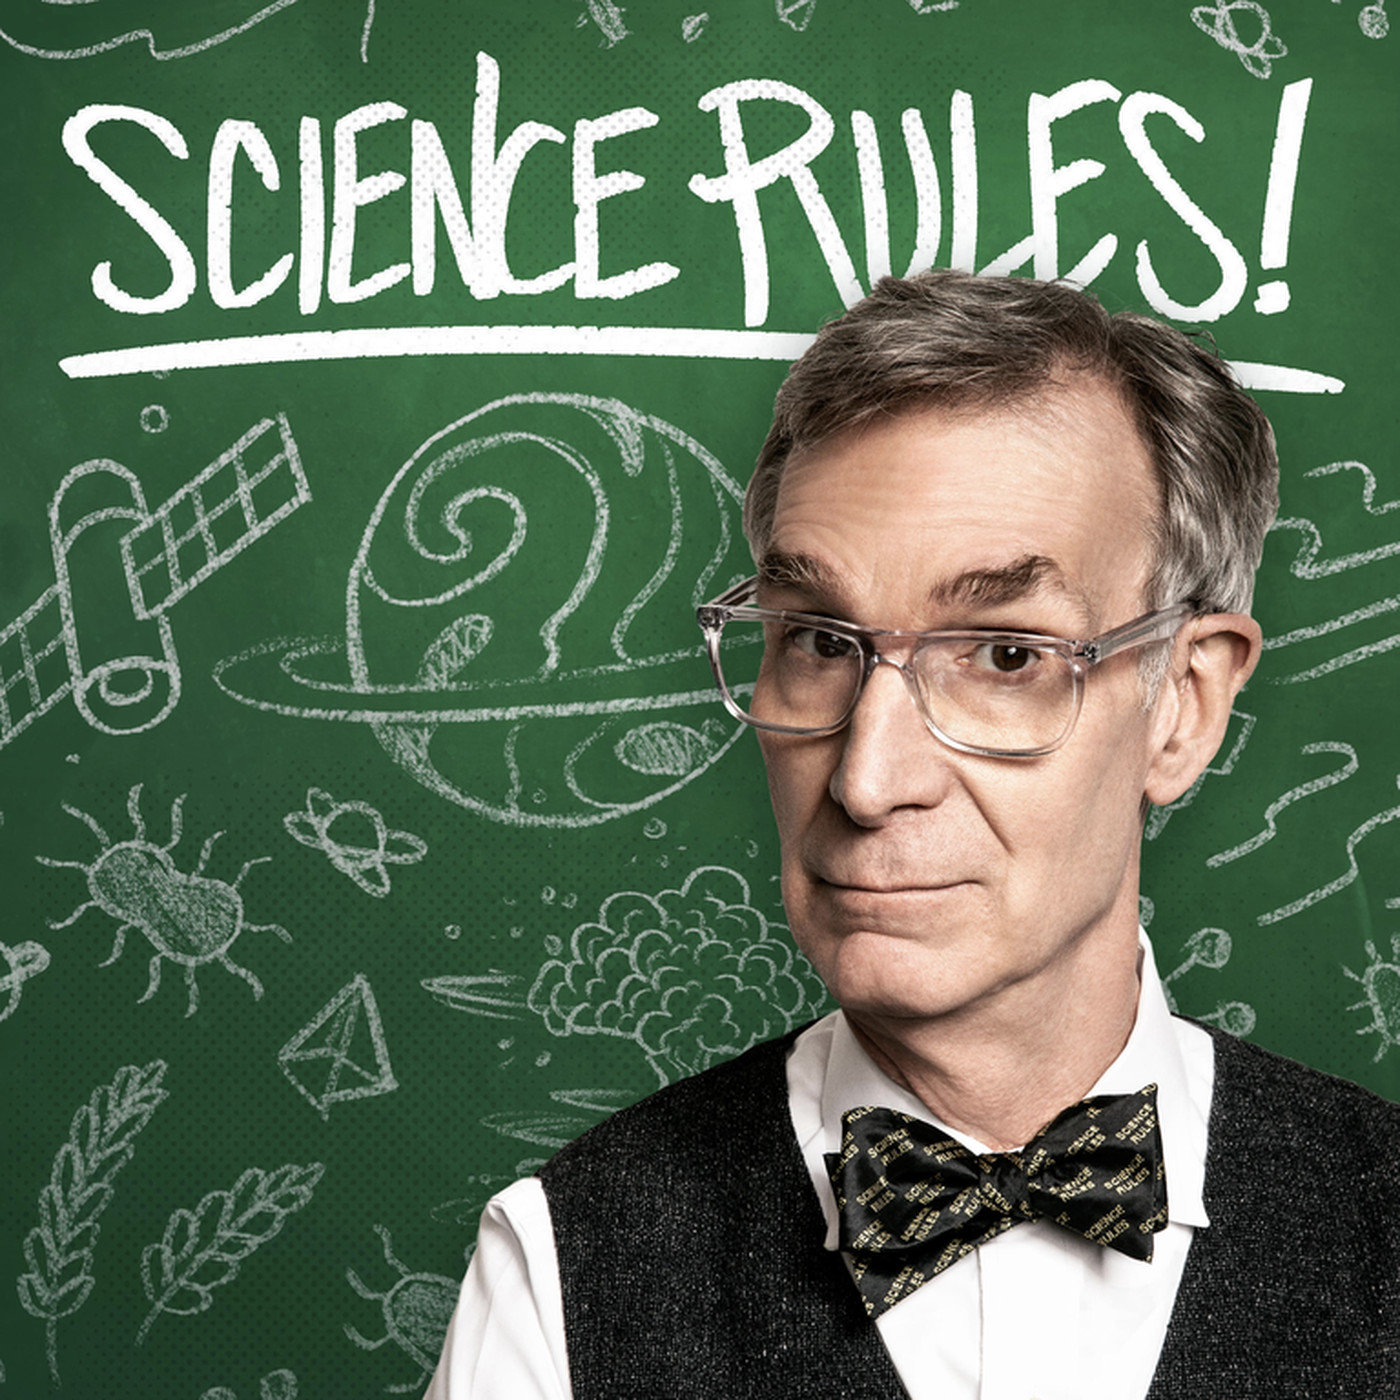 Bill Nye wants to educate the public about science with his new podcast